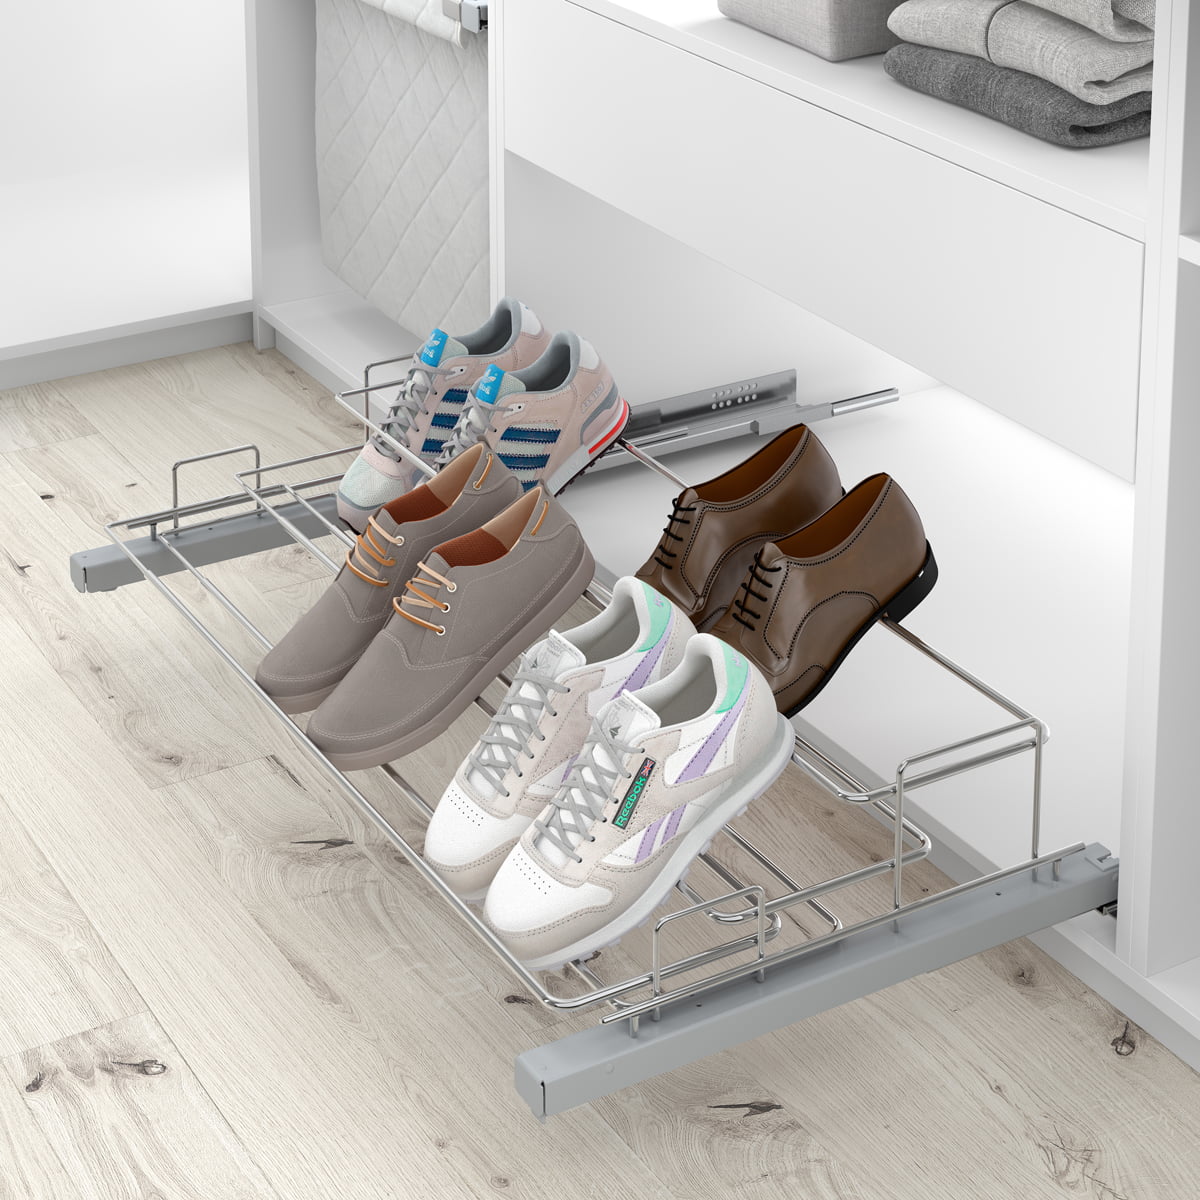 Buy Sneaker Throne Shoe Rack With Lights Sleek Wood Shoe Shelf With Sliding  Doors Premium Shoe Organizers and Shoe Storage for Closets Online in India  - Etsy